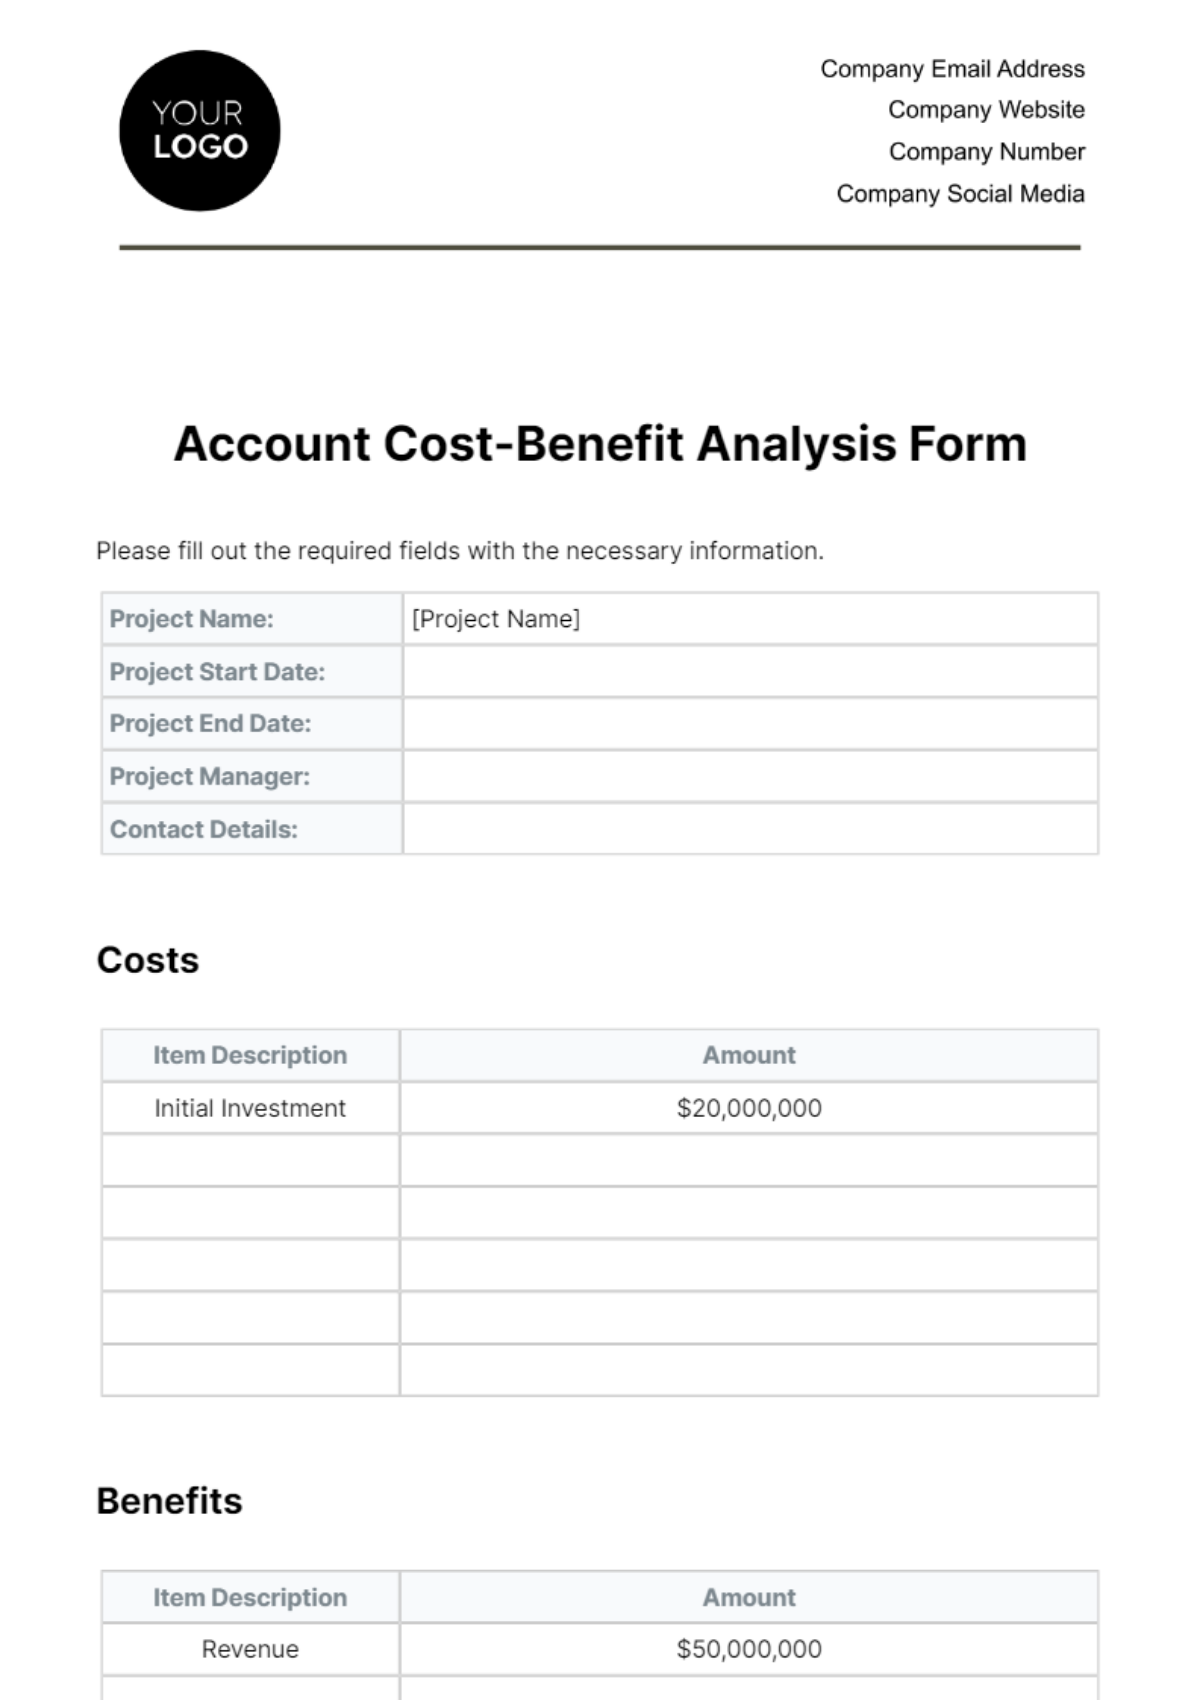 Account Cost-Benefit Analysis Form Template